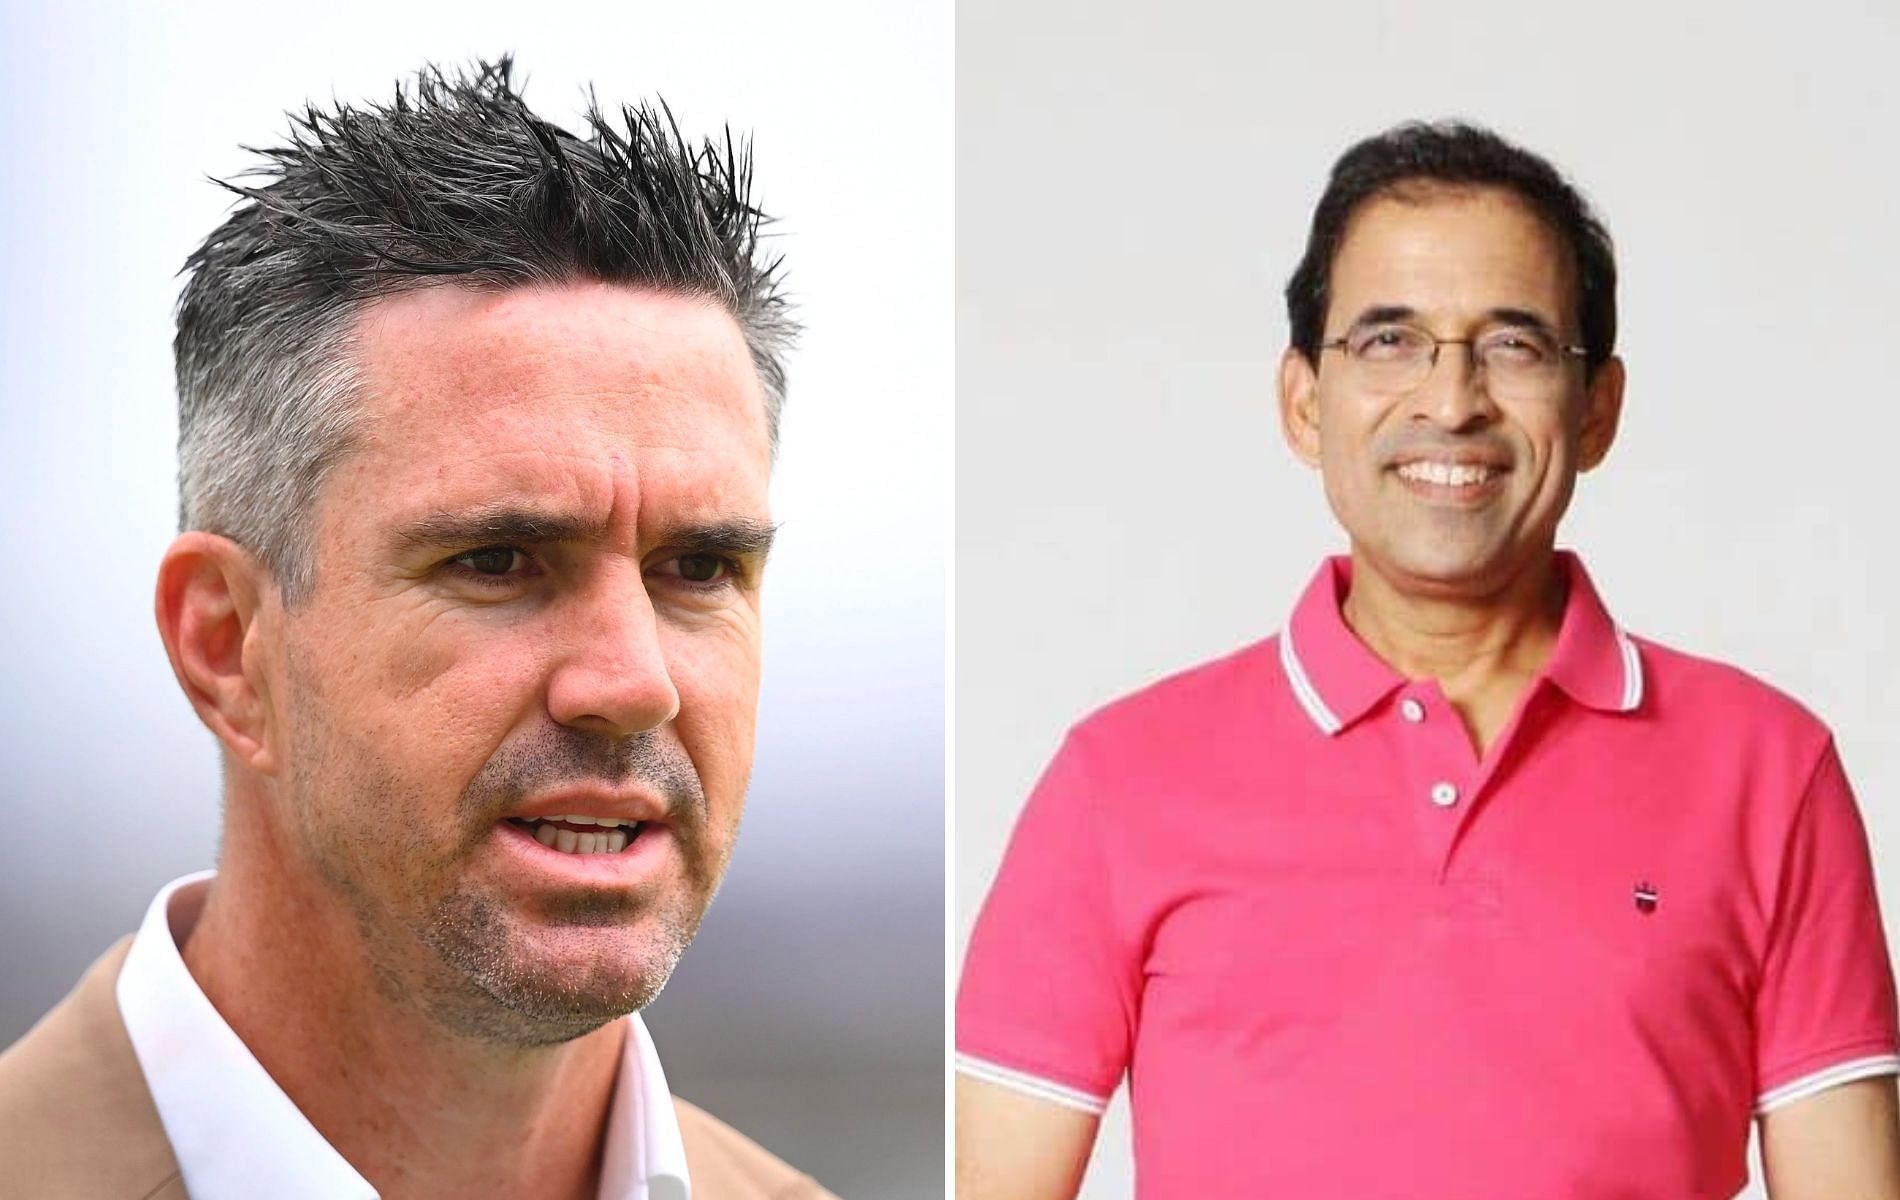 Kevin Pietersen (L) and Harsha Bhogle (R). (Pics: Getty/Instagram)